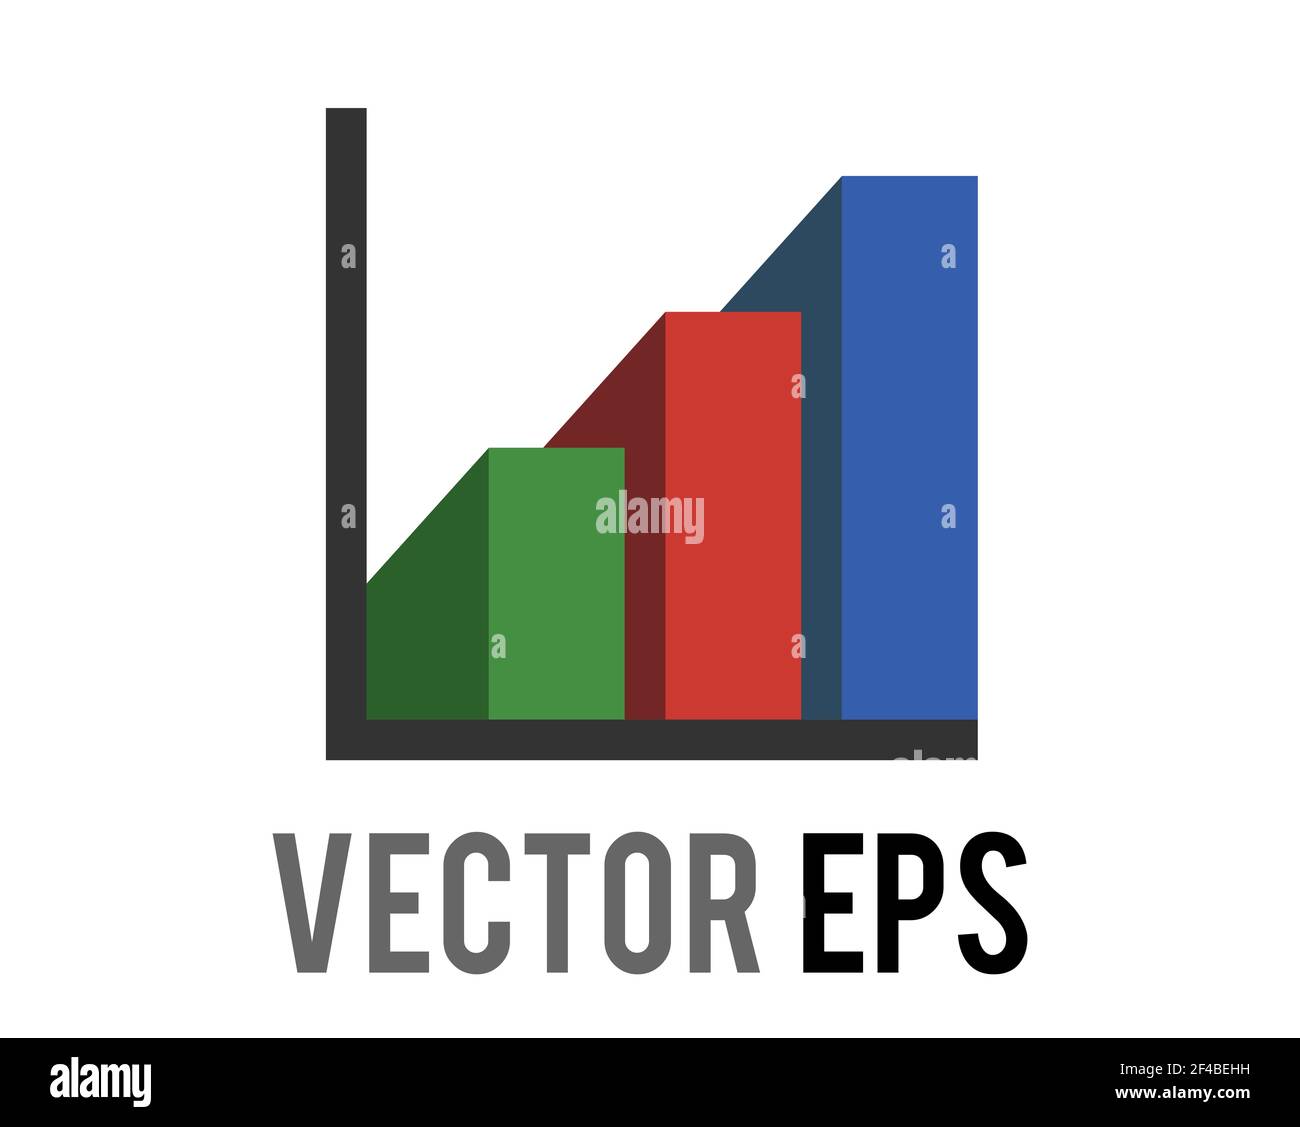 The Vector business presentation summary finance report bar chart icon showing three different colored vertical rectangles Stock Photo